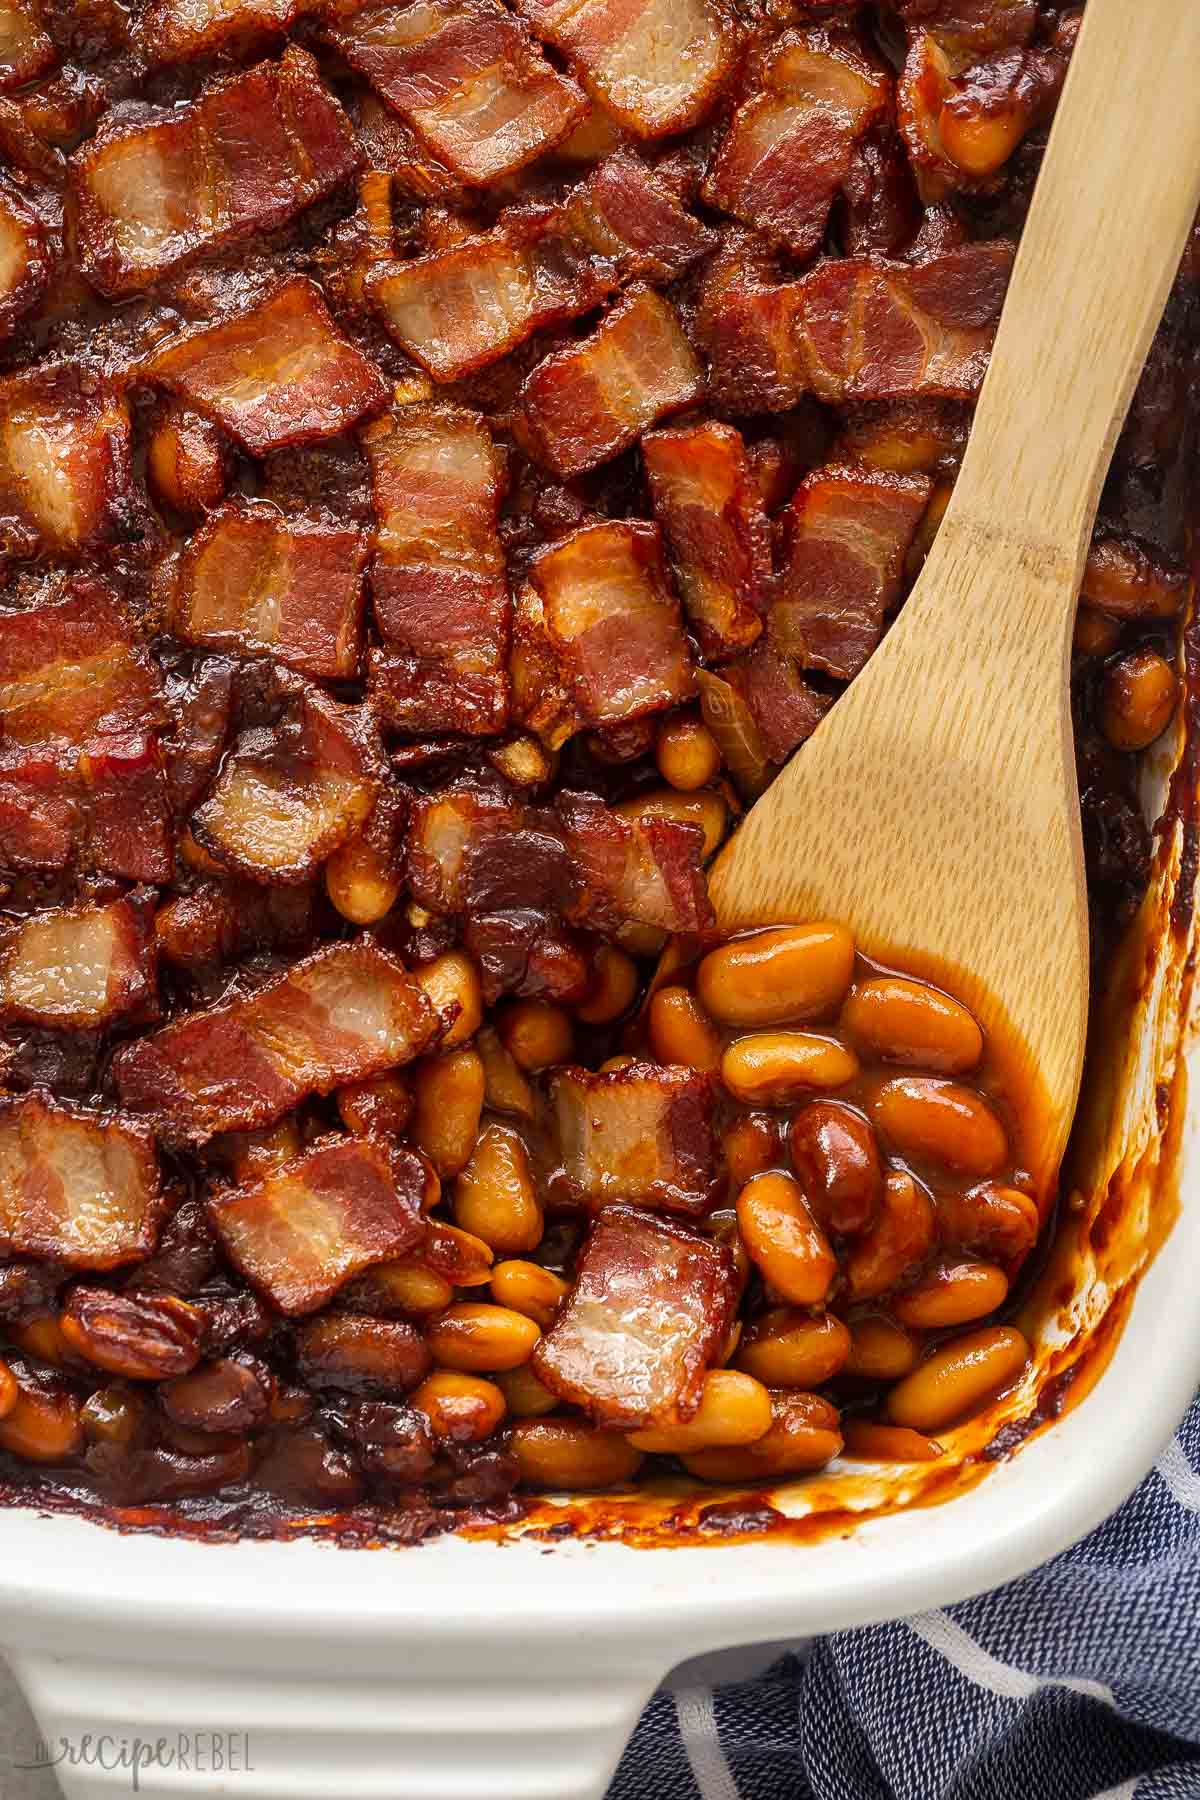 close up image of maple bacon baked beans with wooden spoon stuck in.